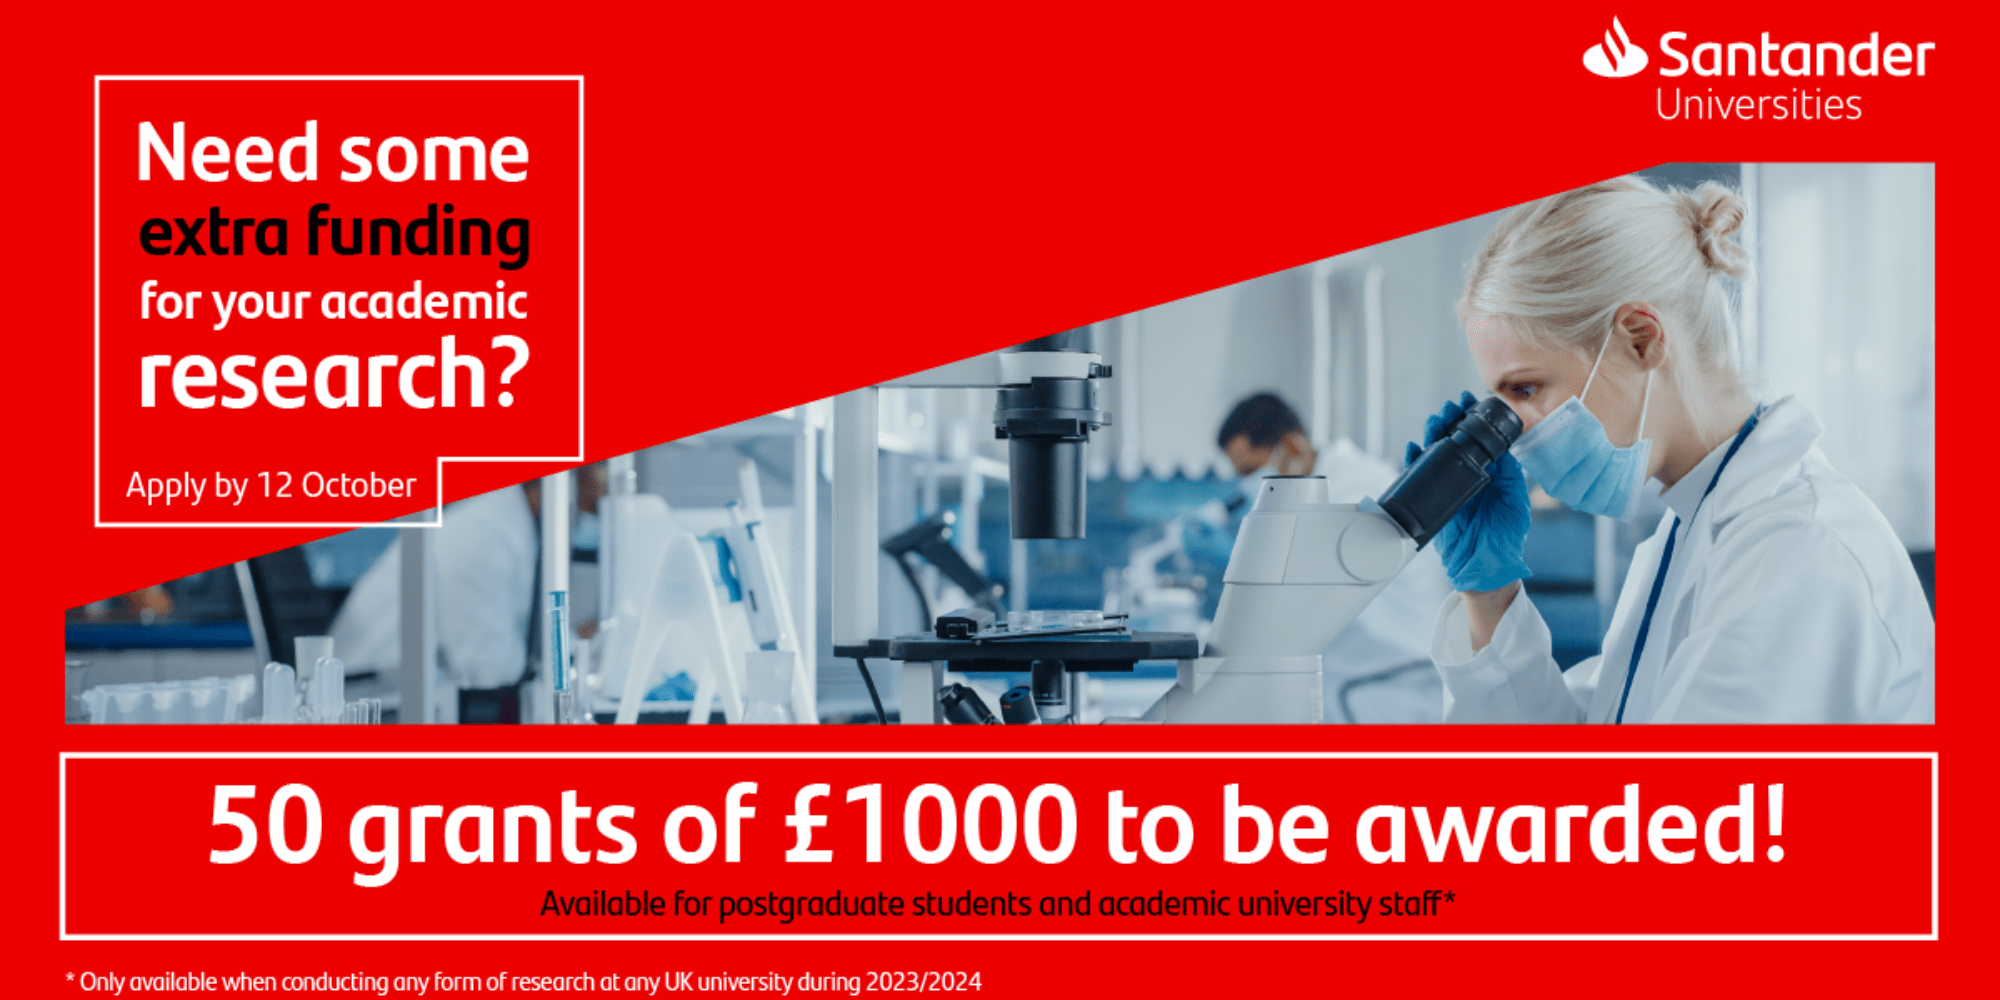 Santander Universities. A woman and man are in white lab coats looking into microscopes. 50 grants of £1,000 are promoted. 